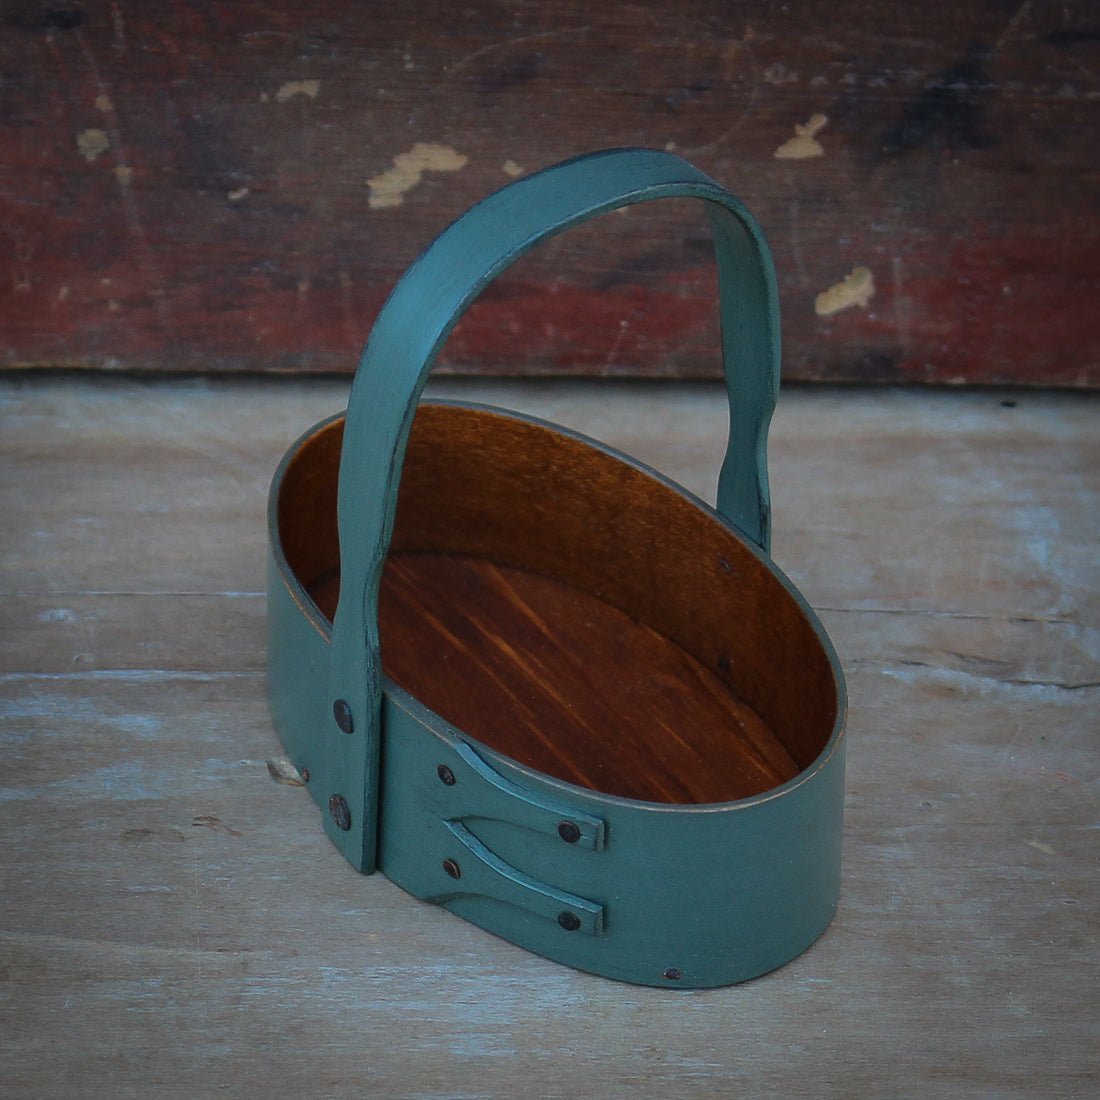 Shaker Carrier, Size #1, LeHays Shaker Boxes, Handcrafted in Maine.  Sea Green Milk Paint Finish, Side View